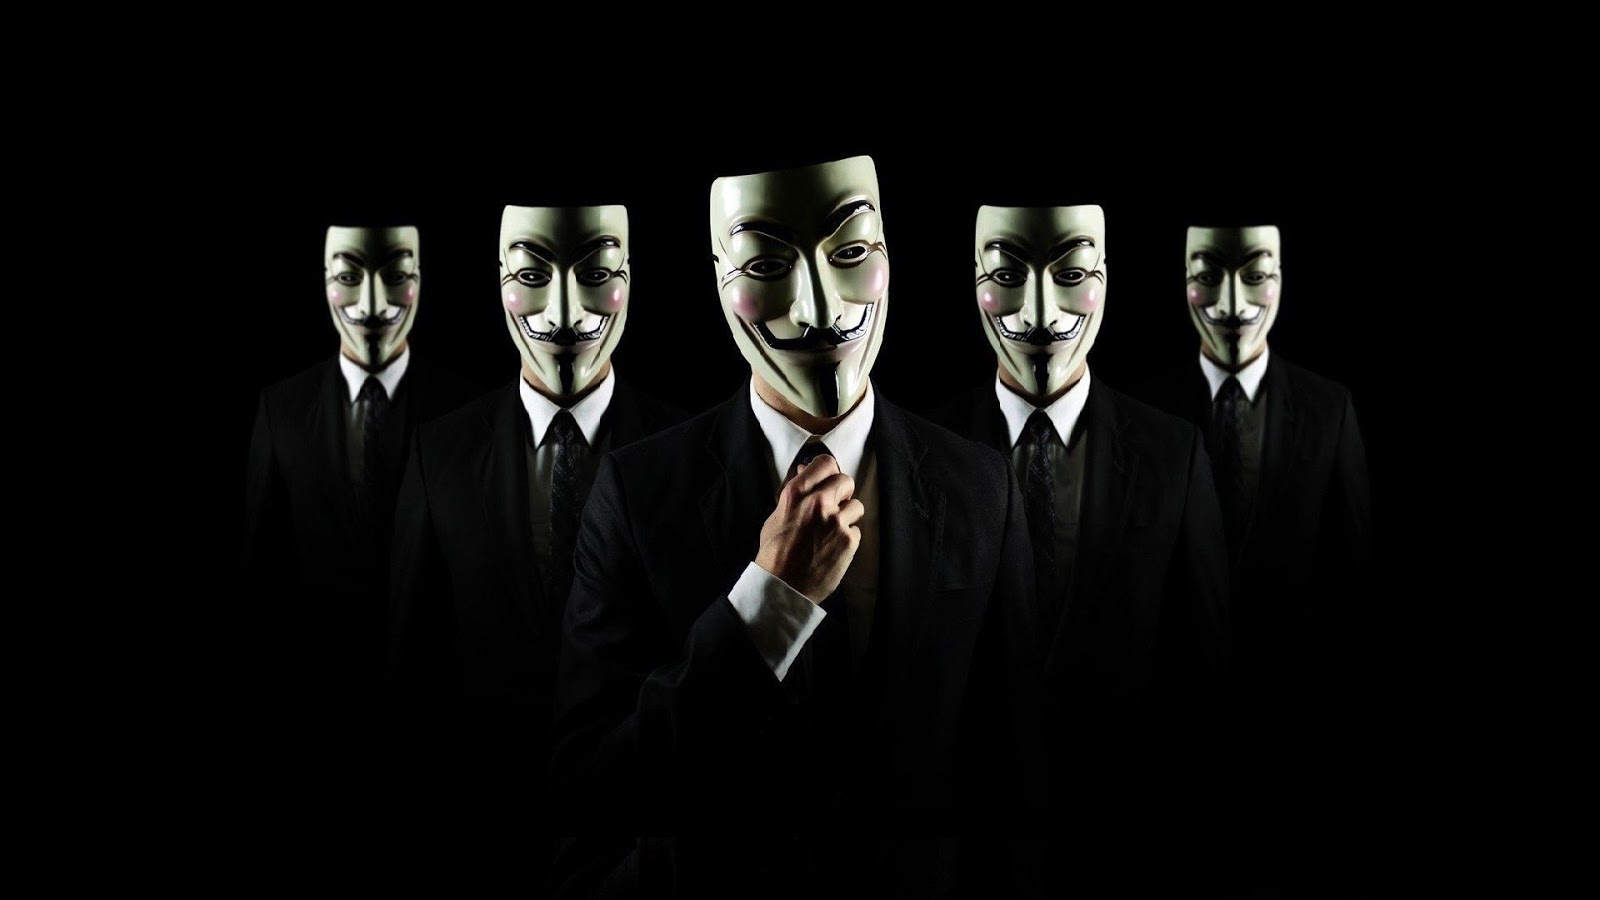 Anonymous Wallpaper Full HD – Ảnh Anonymous đẹp - Official